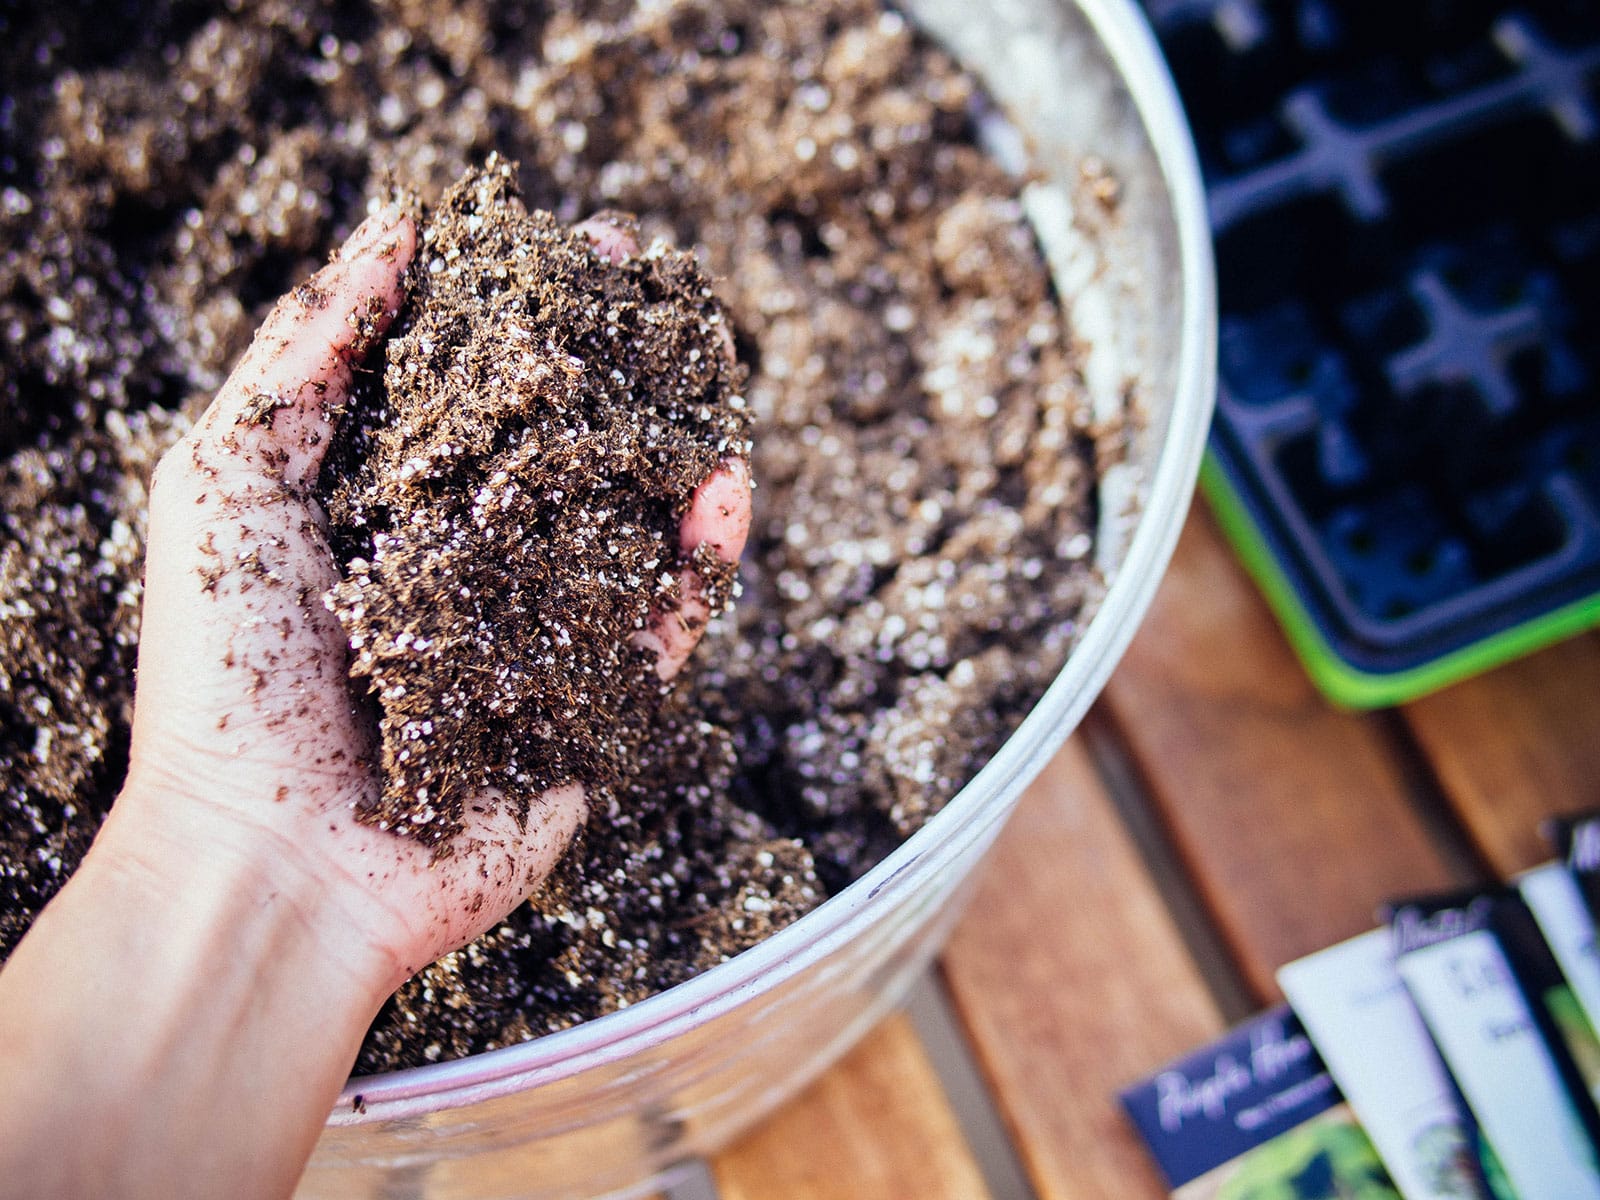 Close-up of hand grabbing a fistful of potting soil from a galvanized tub